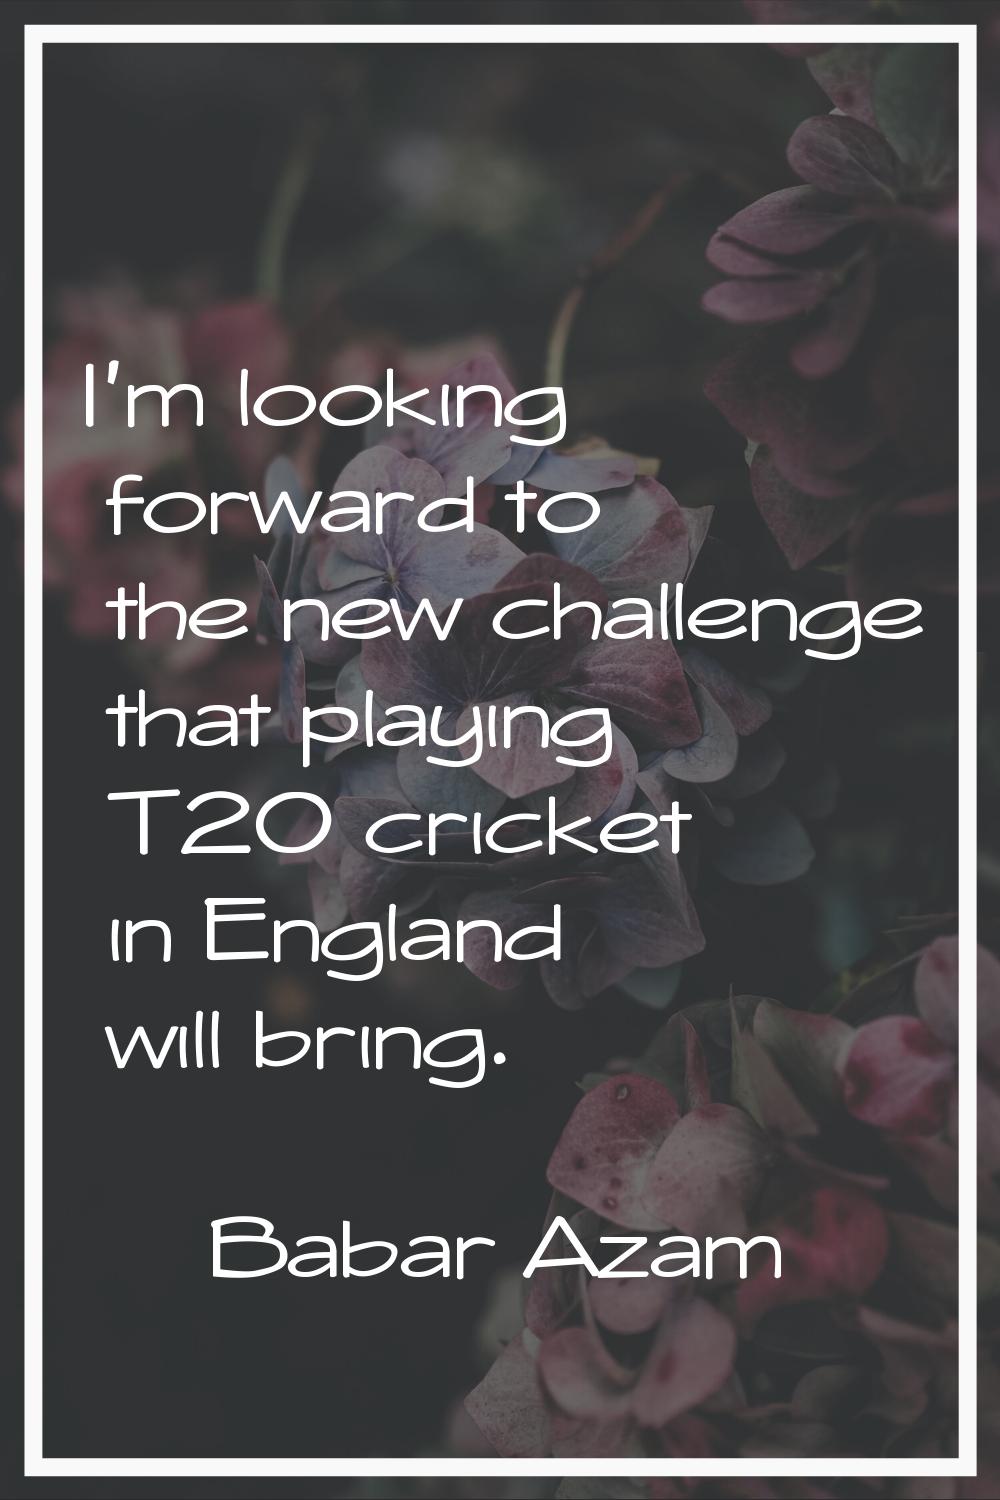 I'm looking forward to the new challenge that playing T20 cricket in England will bring.